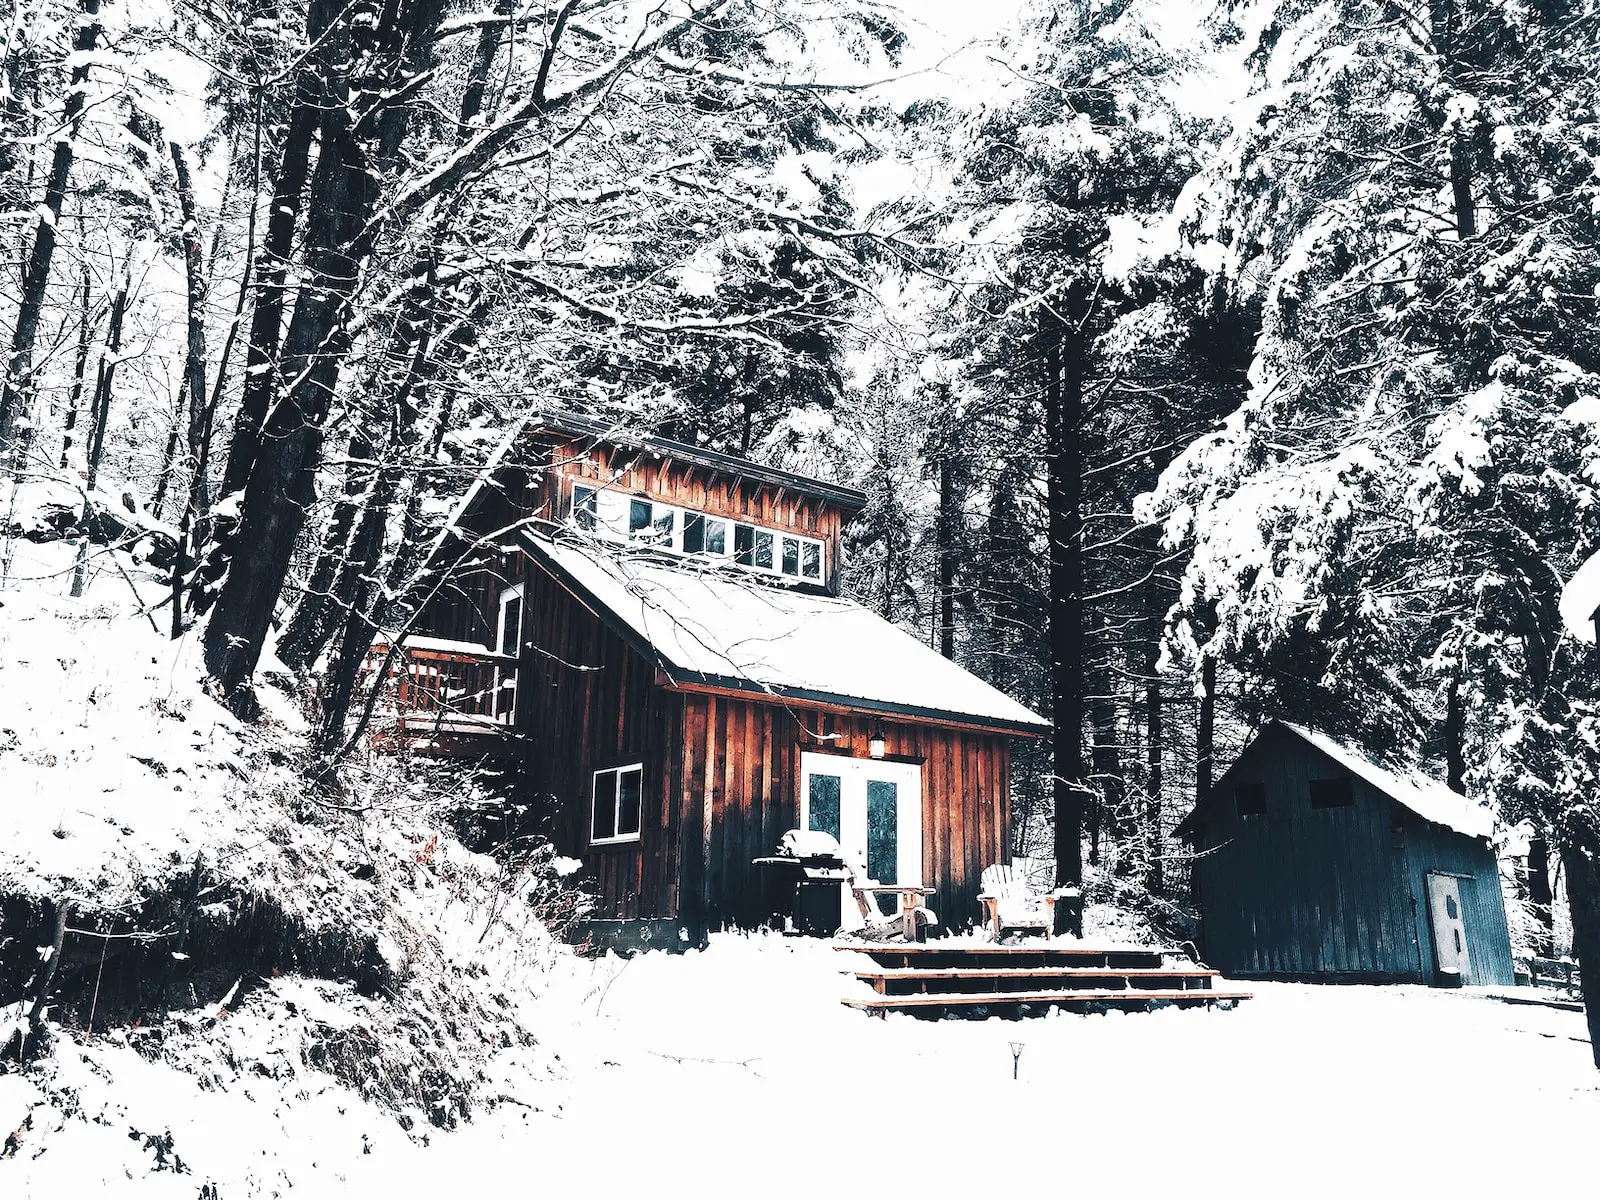 Top 10 Winter Home Safety Tips to Keep You Cozy and Secure